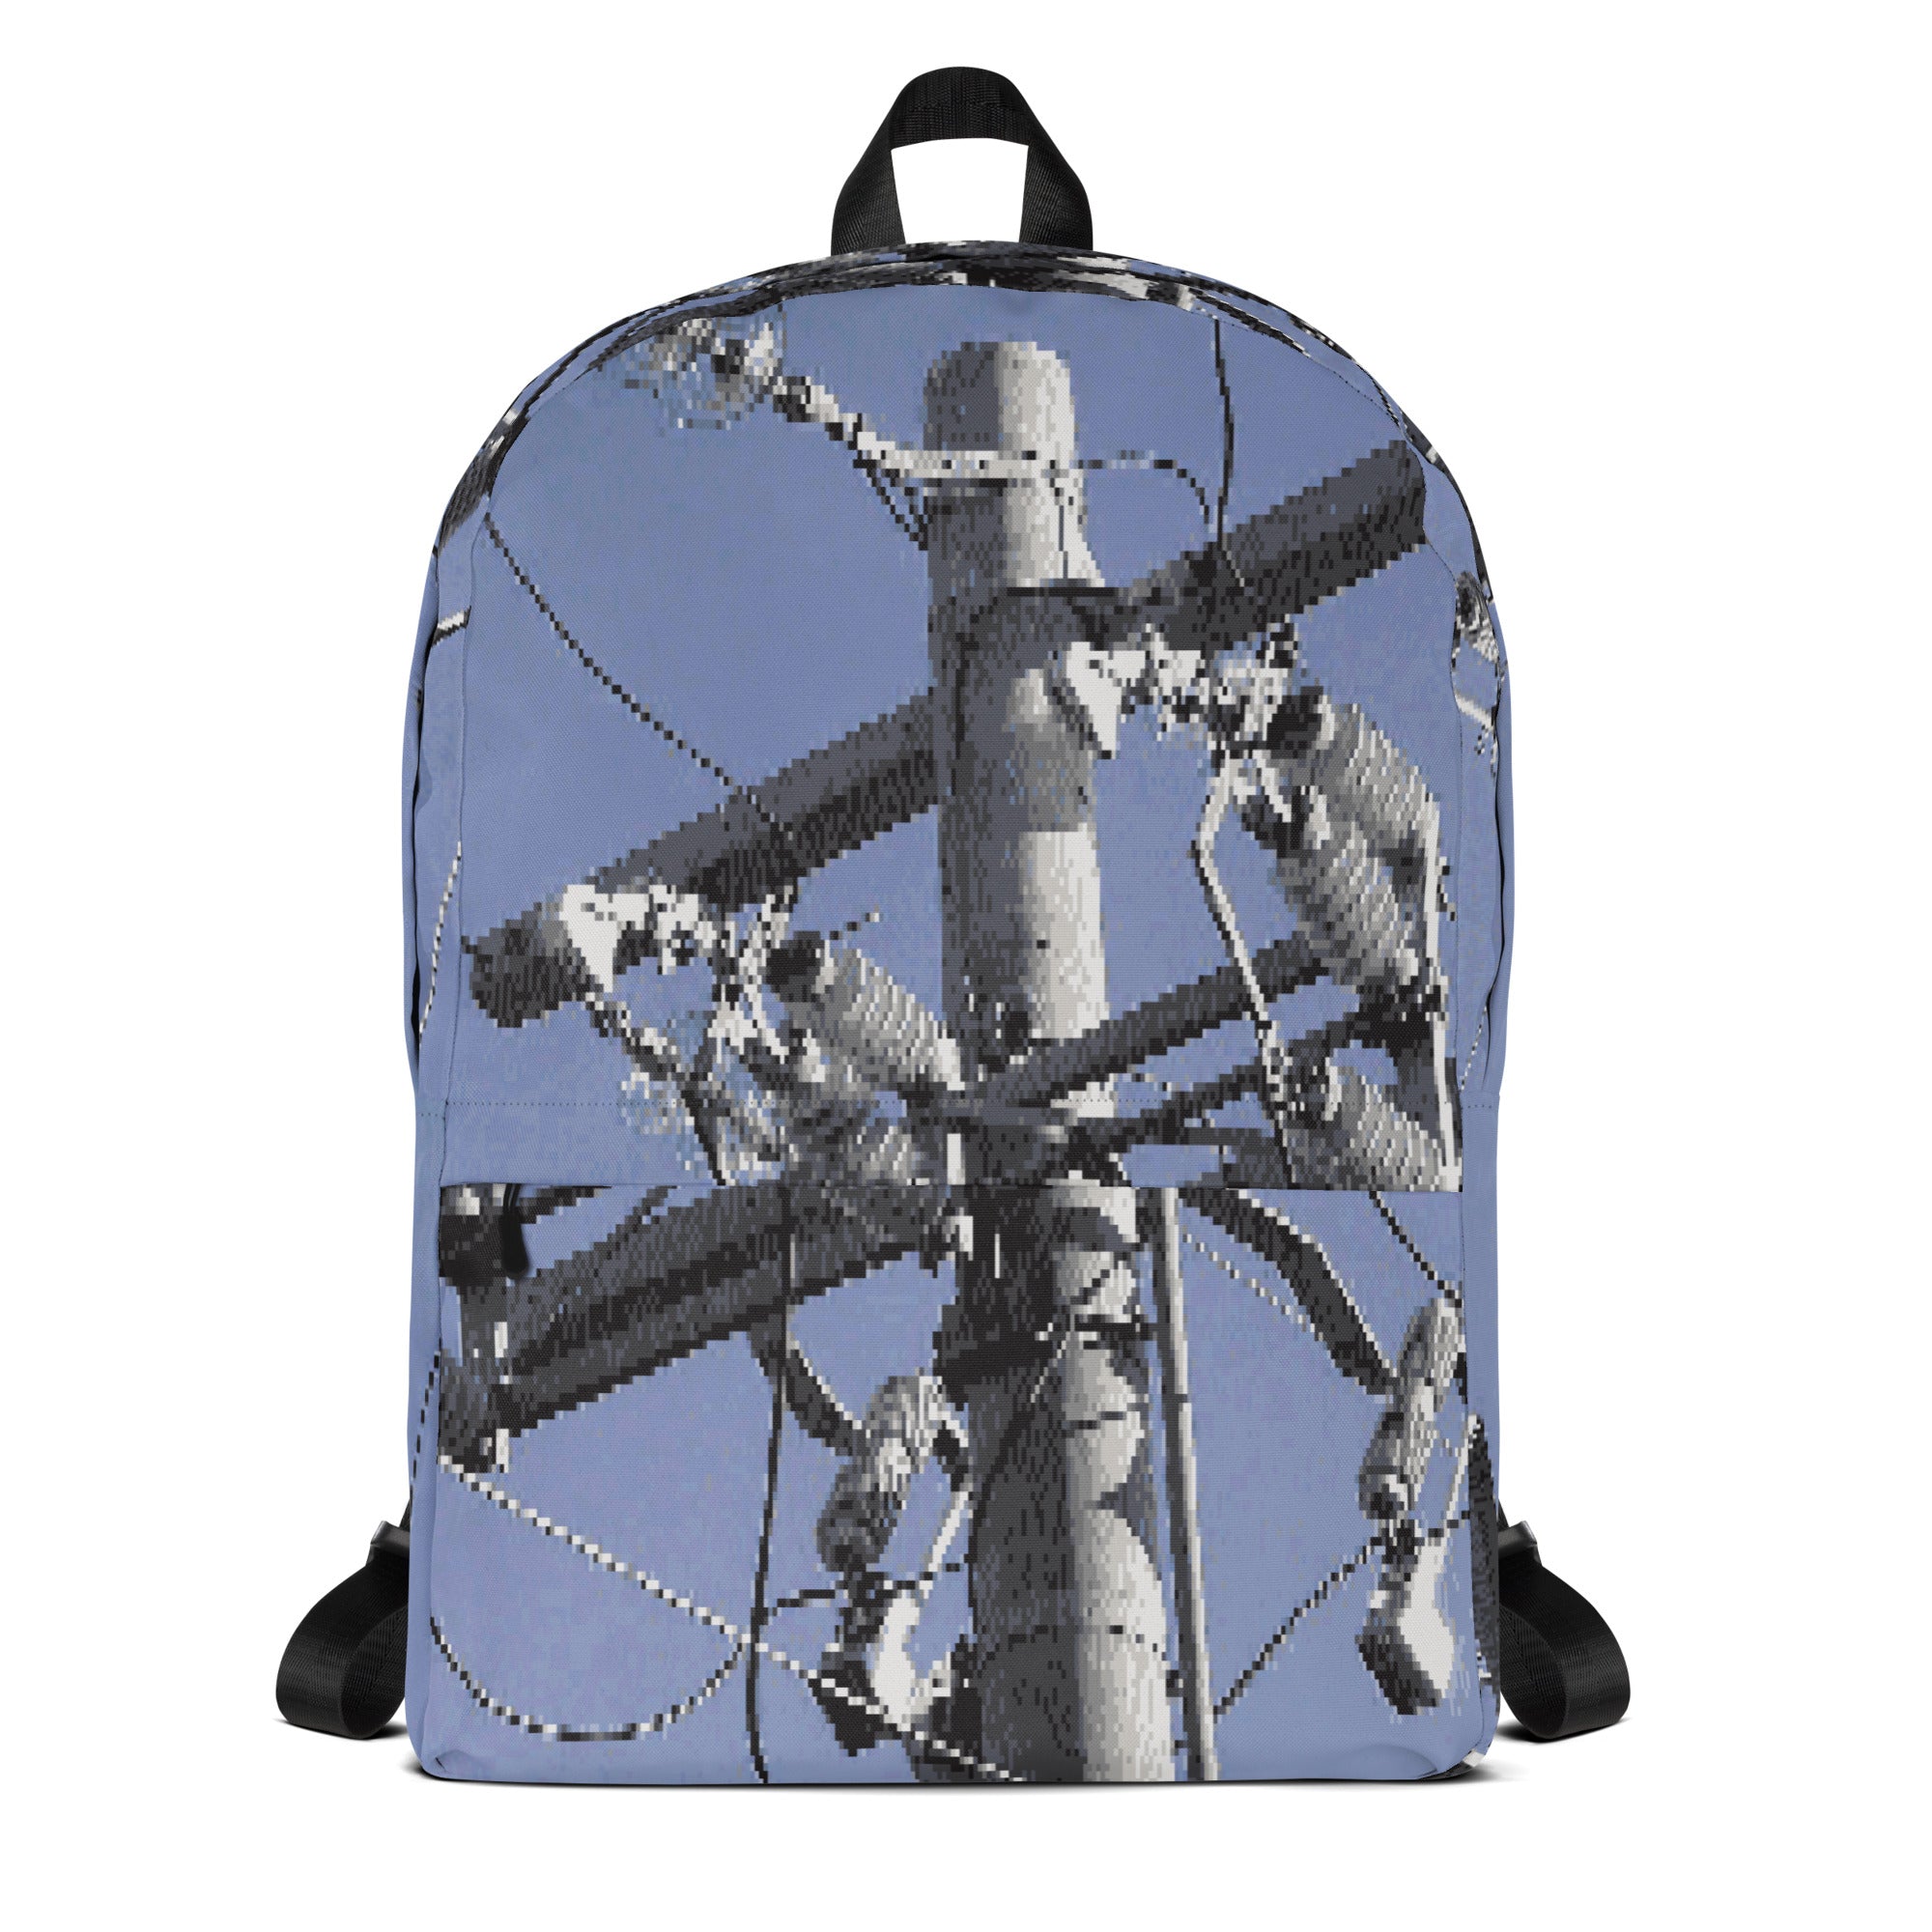 Electricity® Backpack